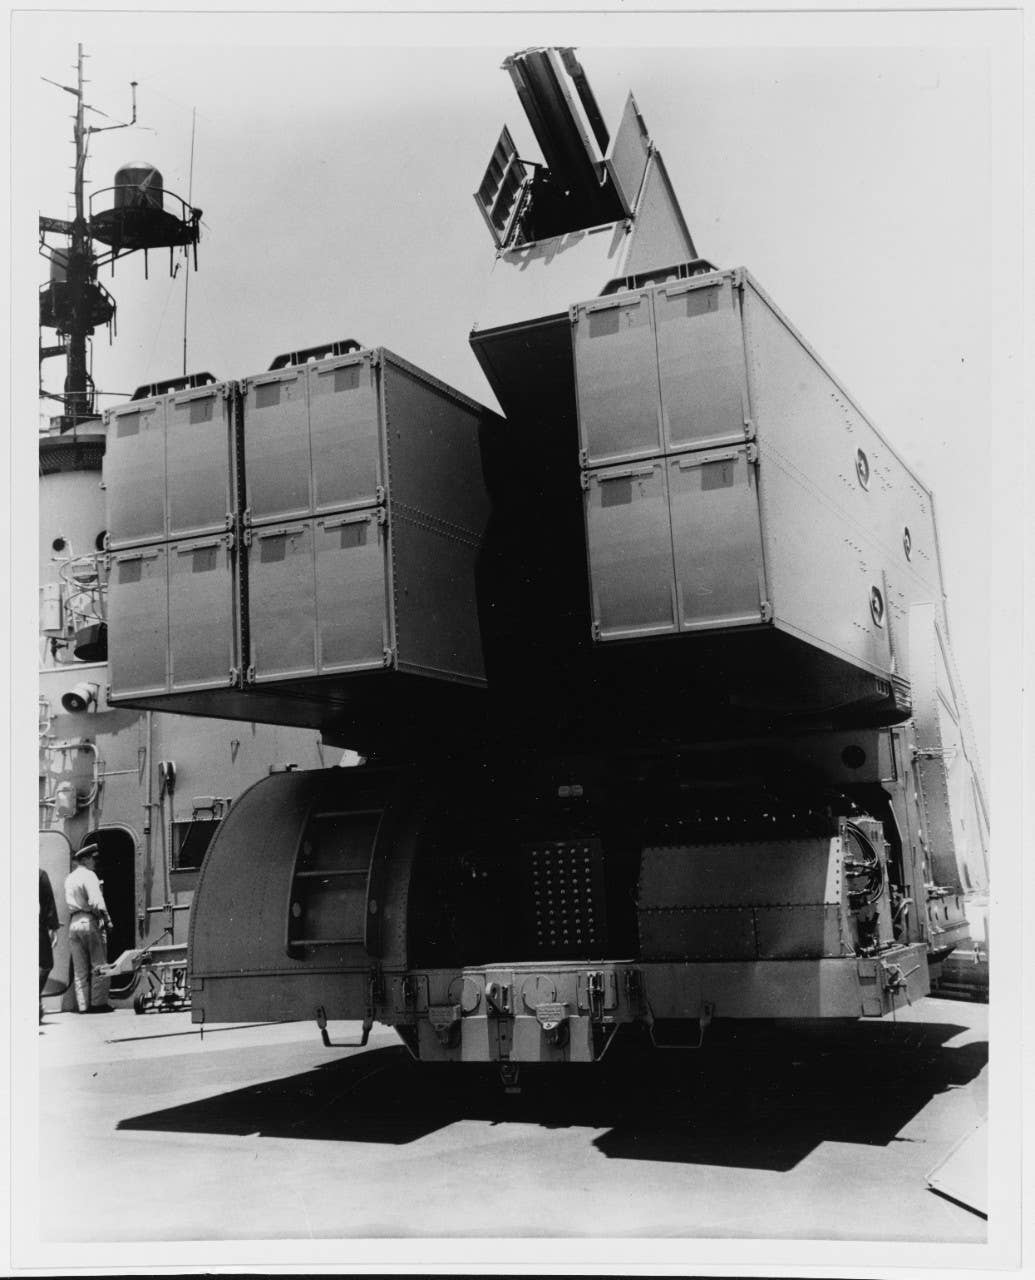 An Anti-Submarine Rocket (ASROC) box launcher capable of firing either a nuclear depth charge or conventional lightweight torpedo. <em>U.S. Navy</em>